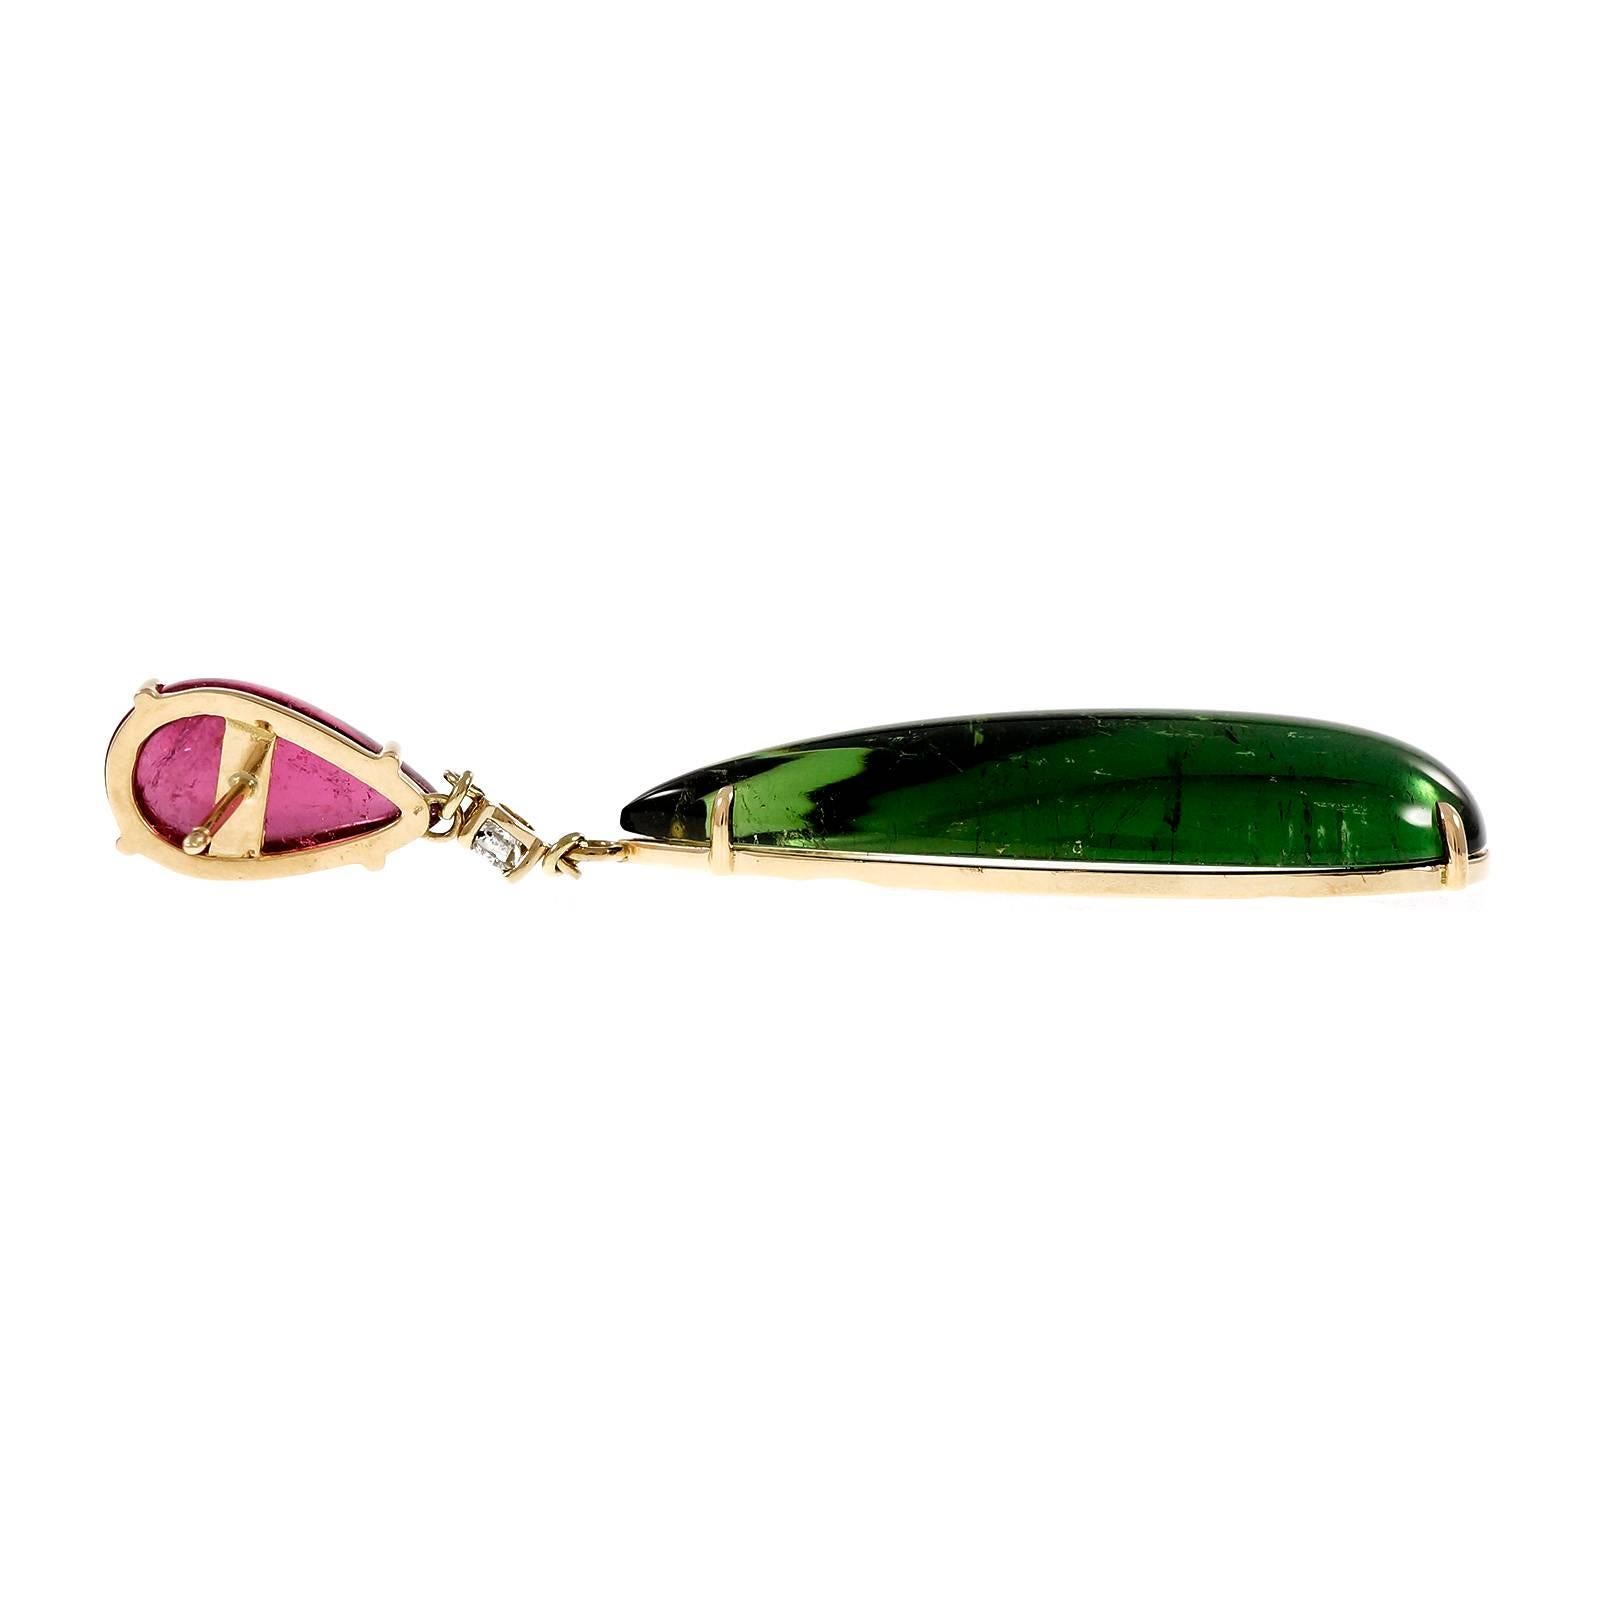 Tourmaline and diamond dangle earrings. Two beautiful elongated pear shaped cabochon green tourmalines totaling 63.41 carats mounted in 18k yellow gold settings with 2 pear shaped pink cabochon tourmalines totaling 13.23cts. Two round cut diamonds